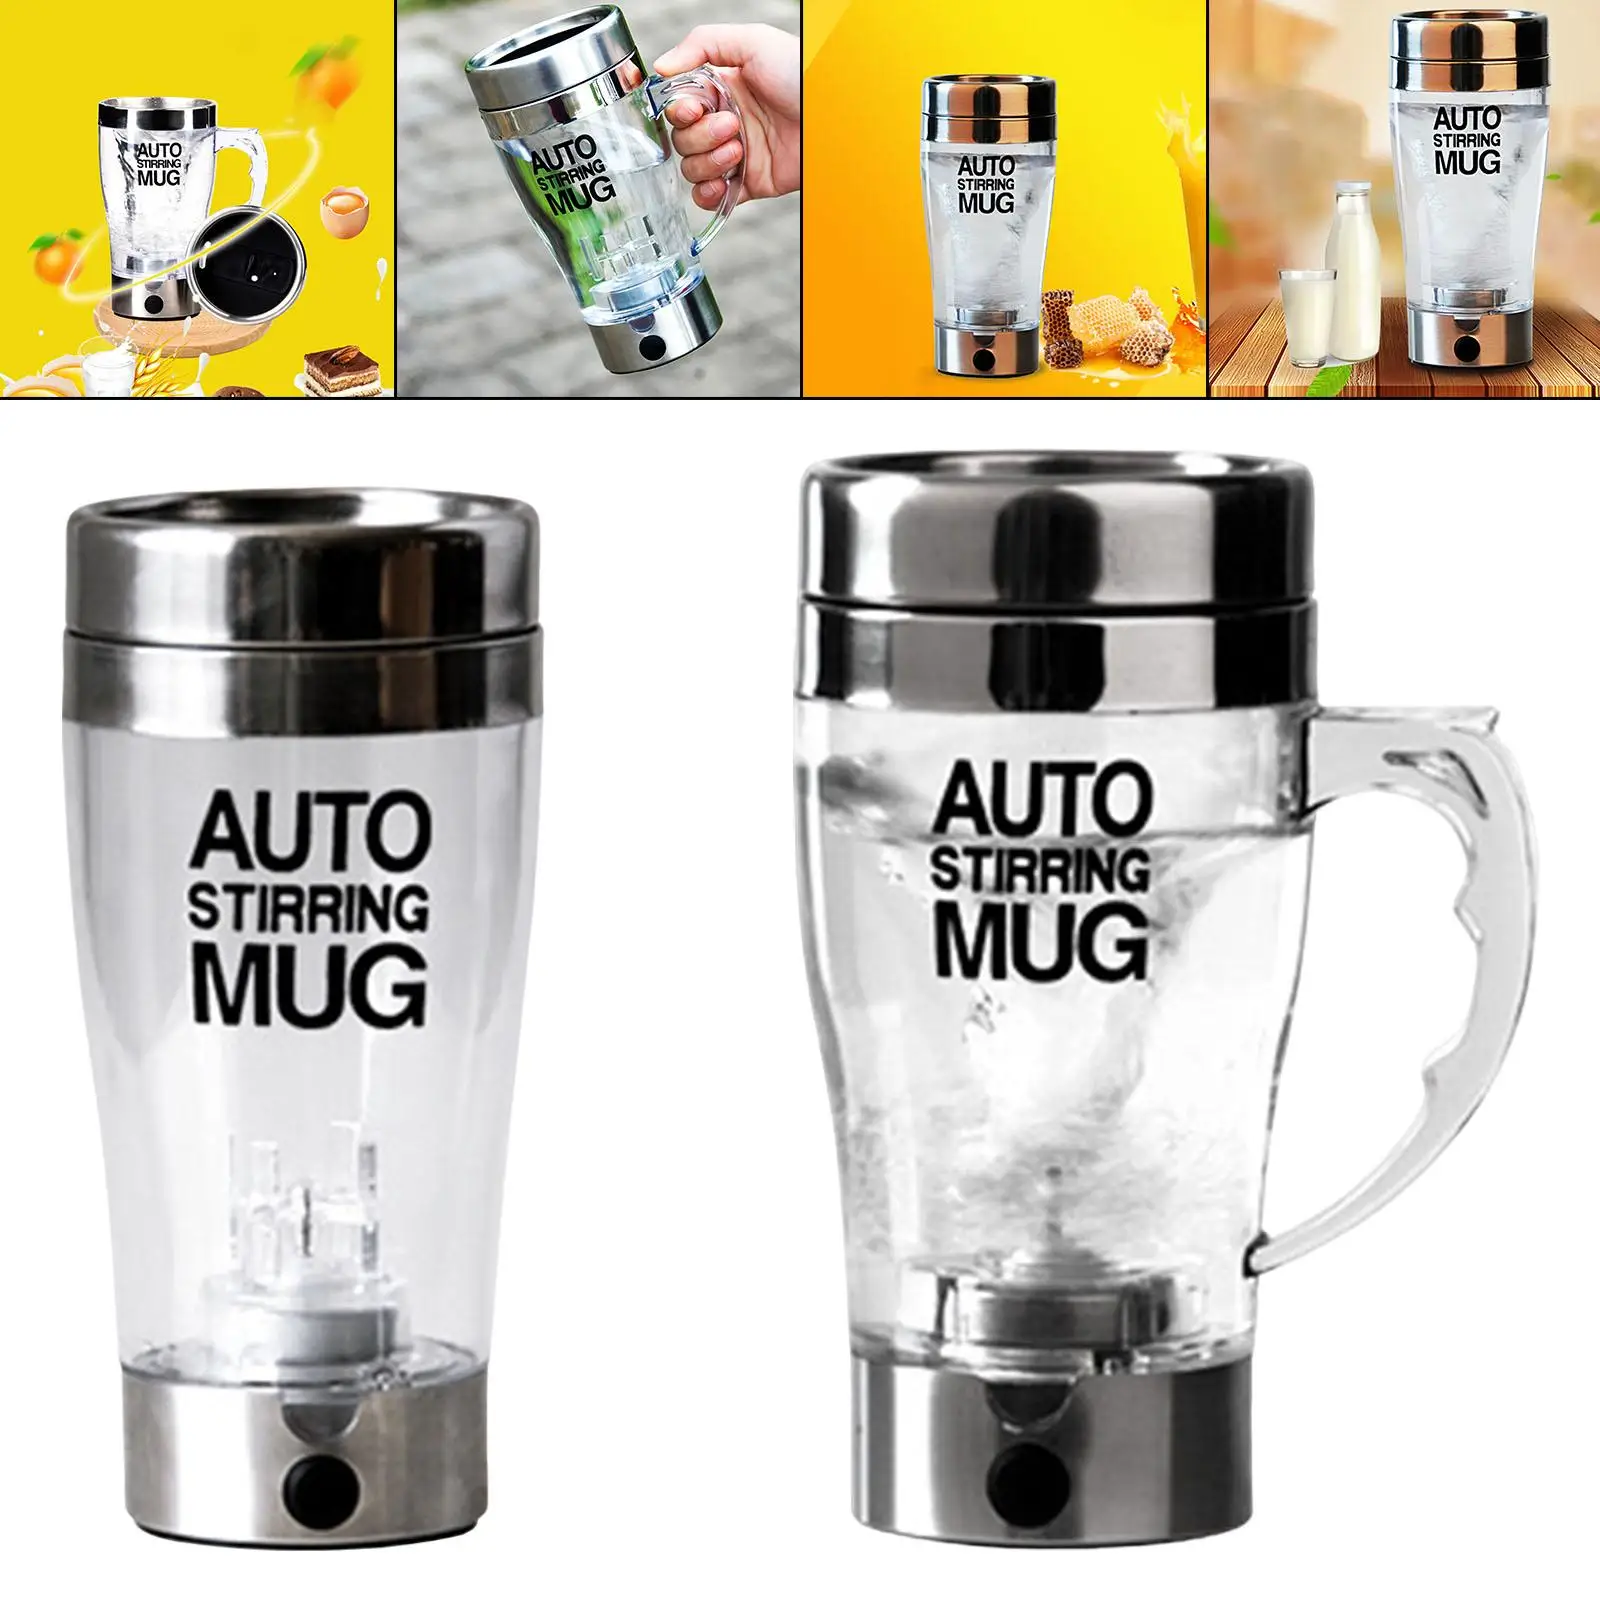  Stirring Mug Battery Operate Stainless Steel for Kitchen Hiking